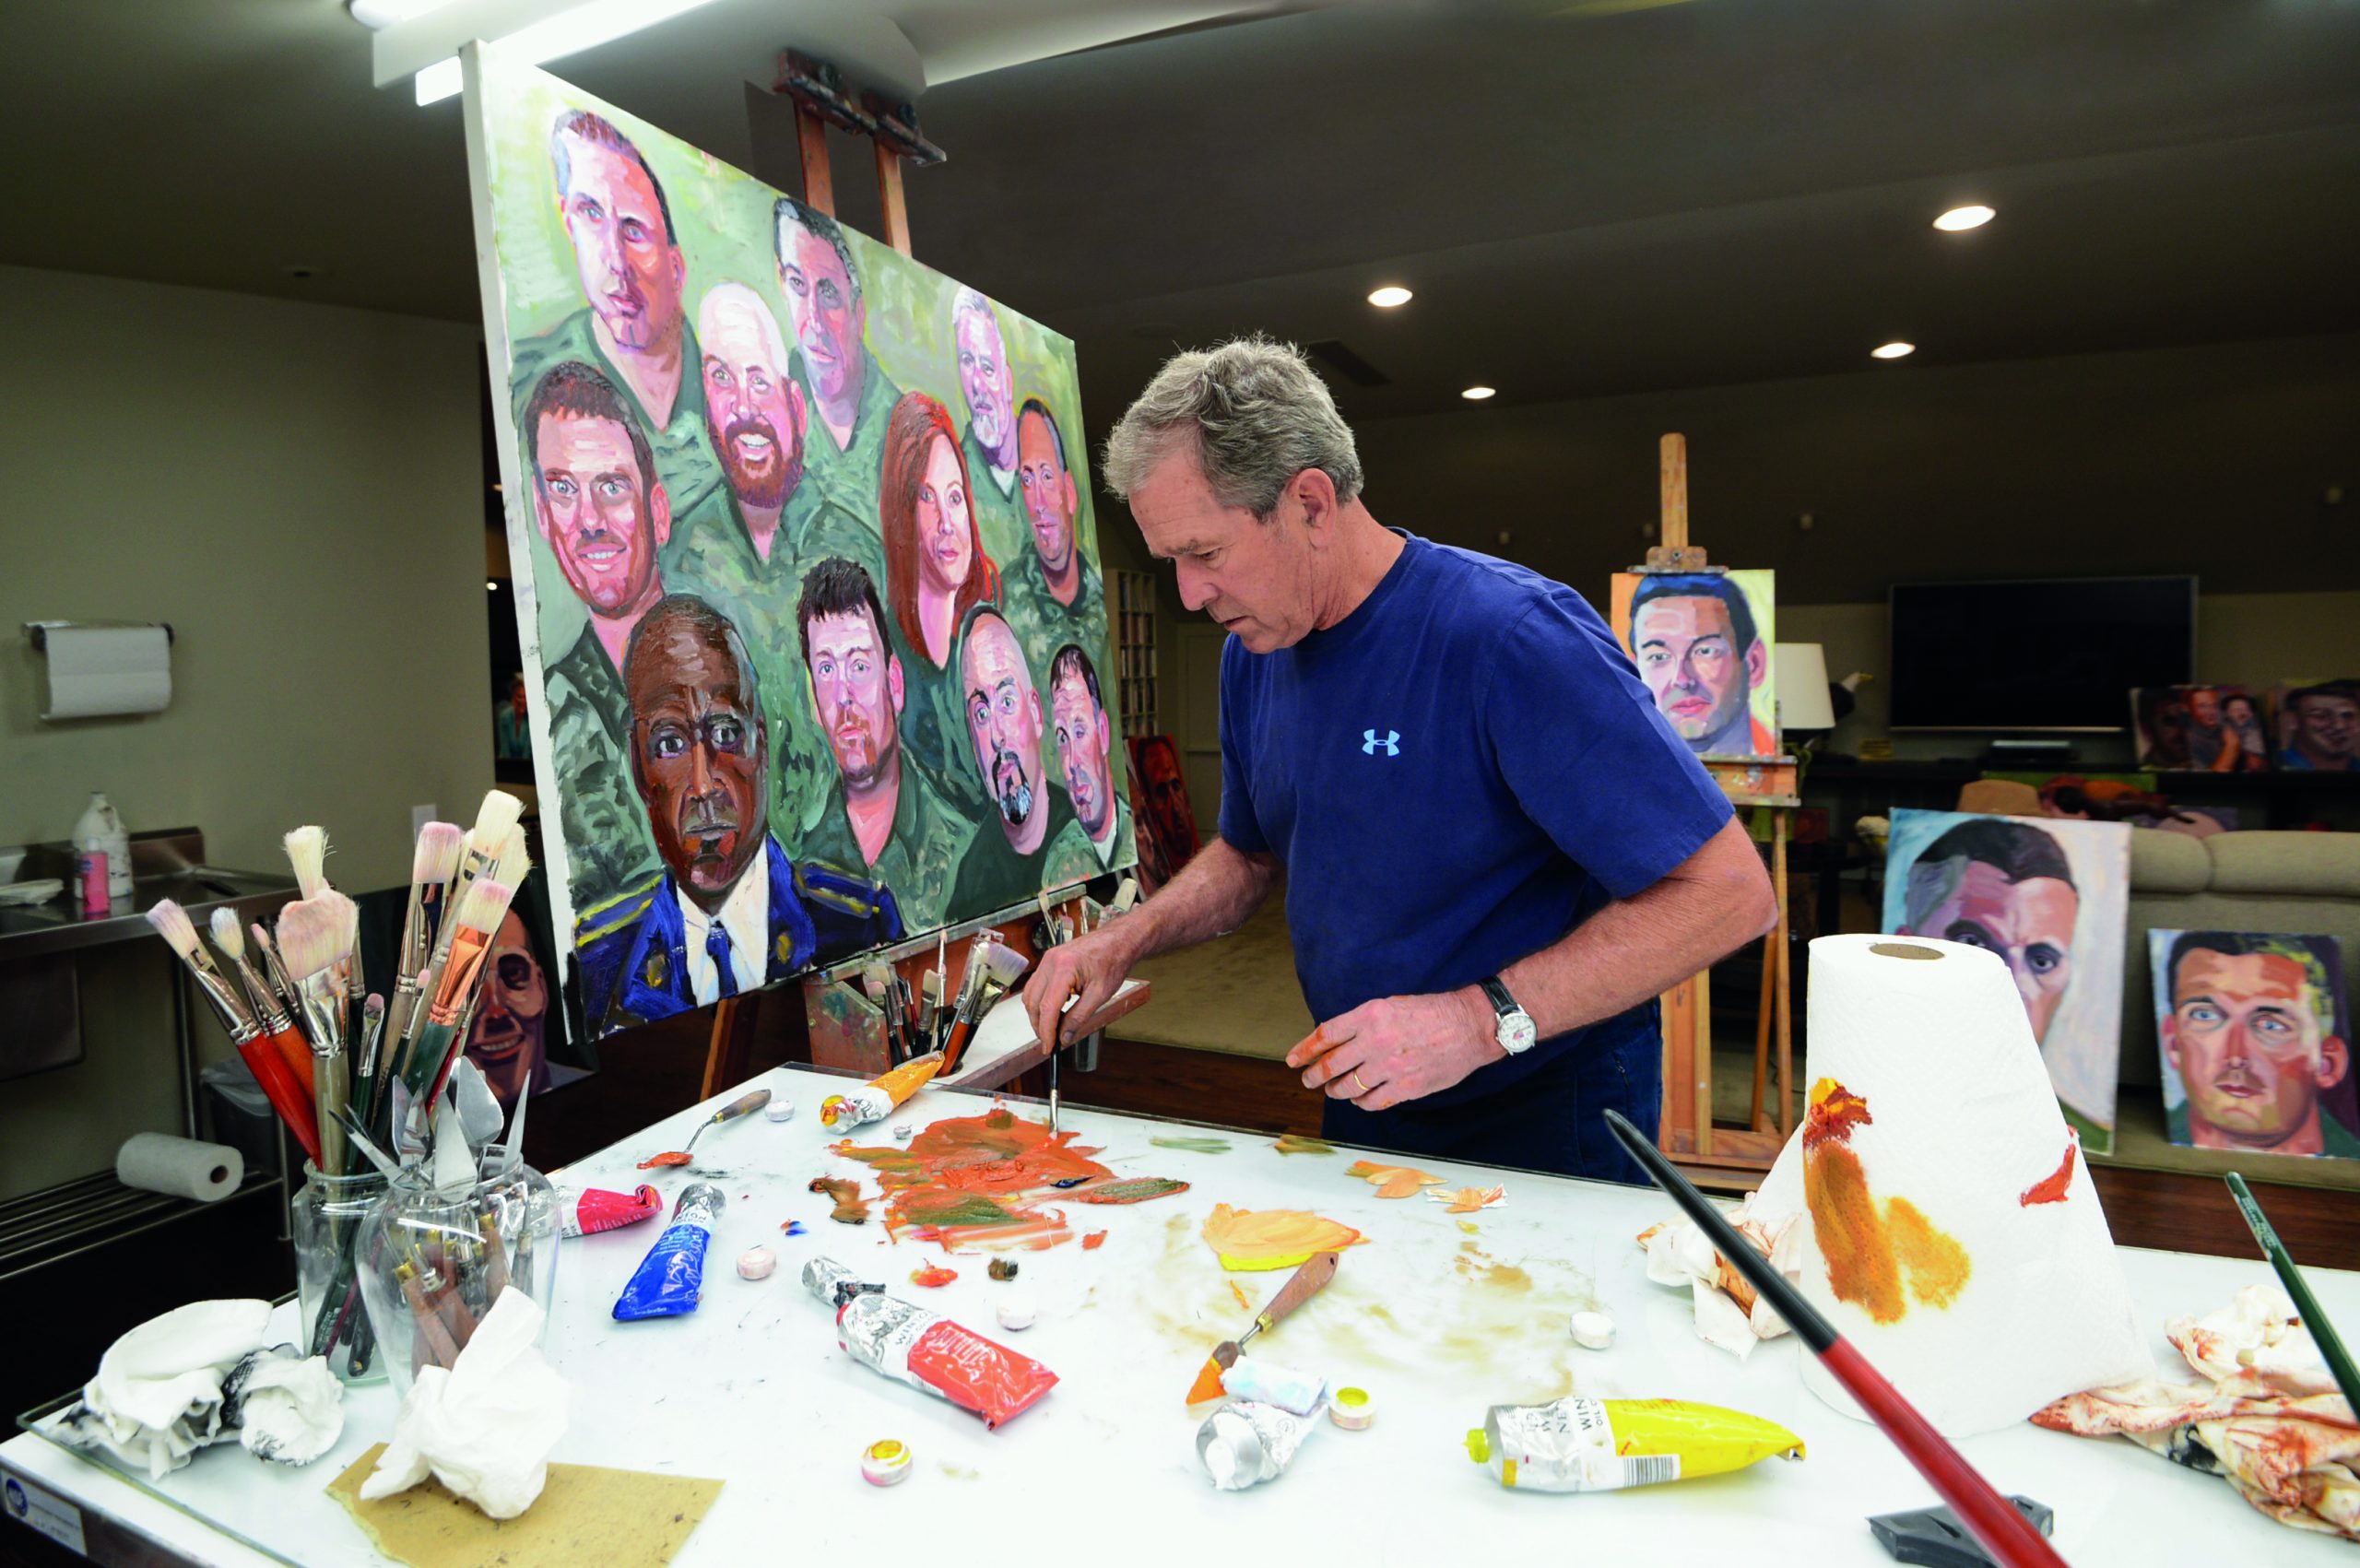 President Bush painting. Photo by Grant Miller